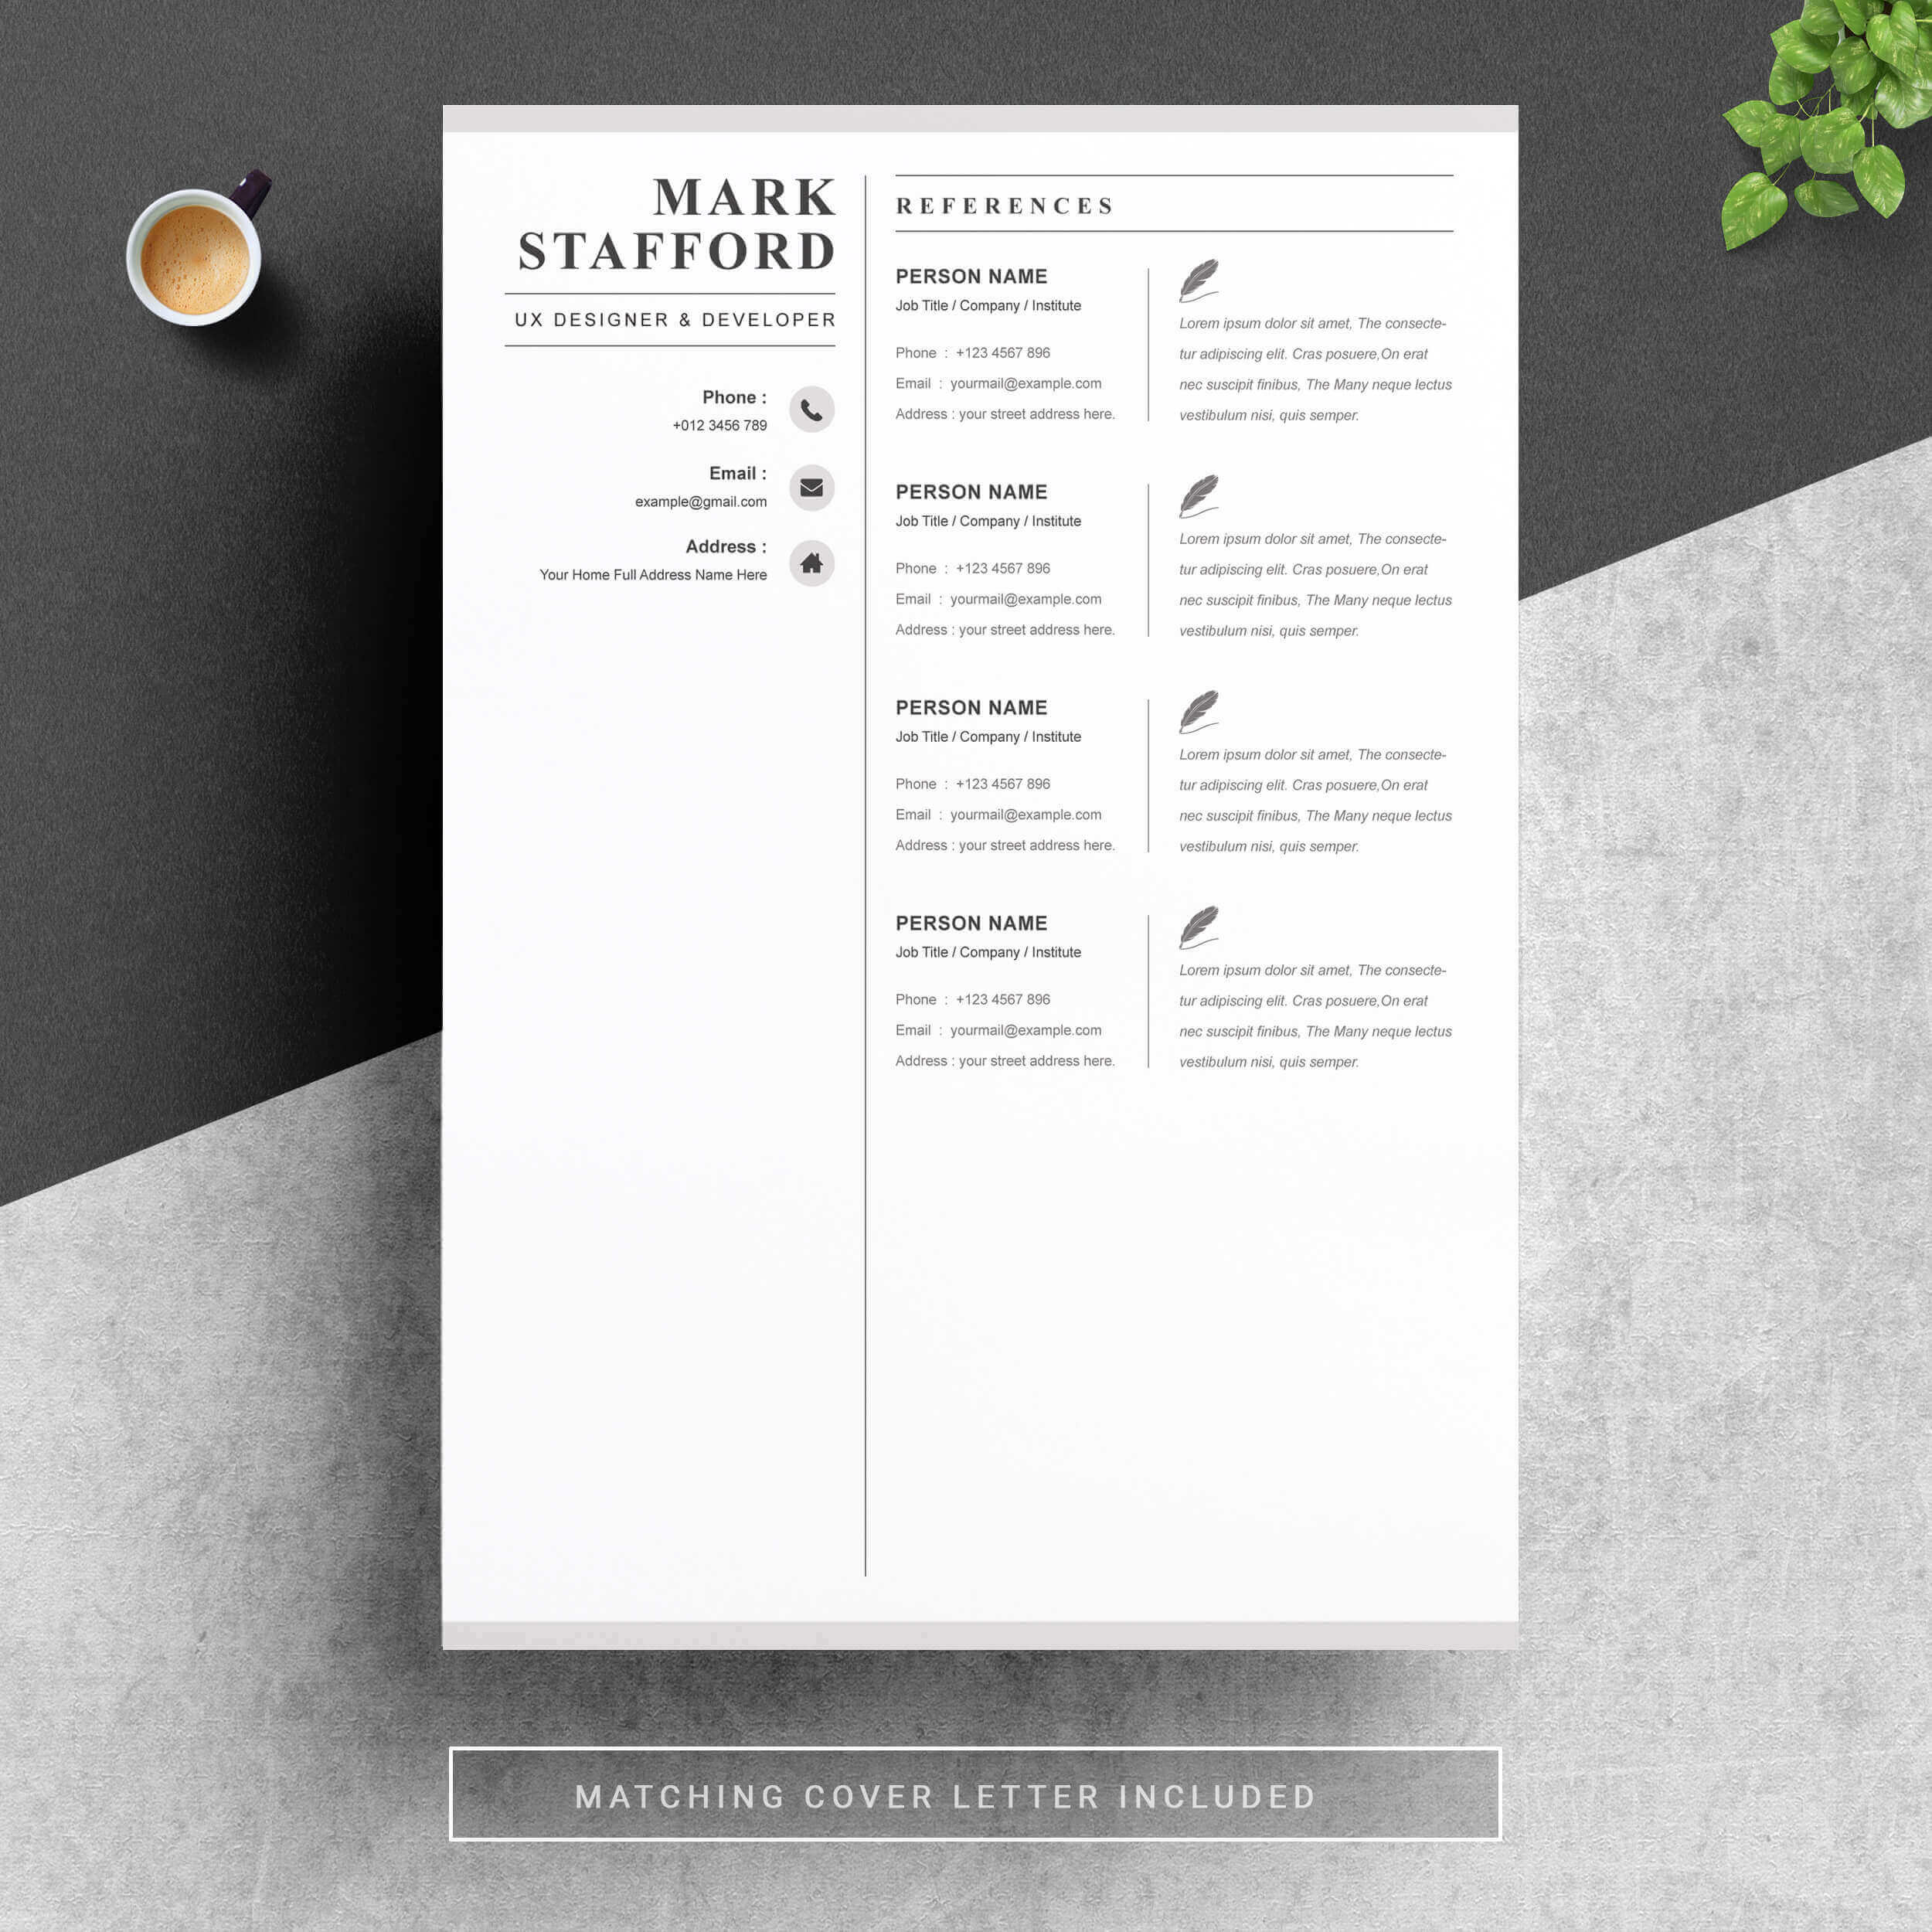 04 resume cover letter page free resume design template 1 731